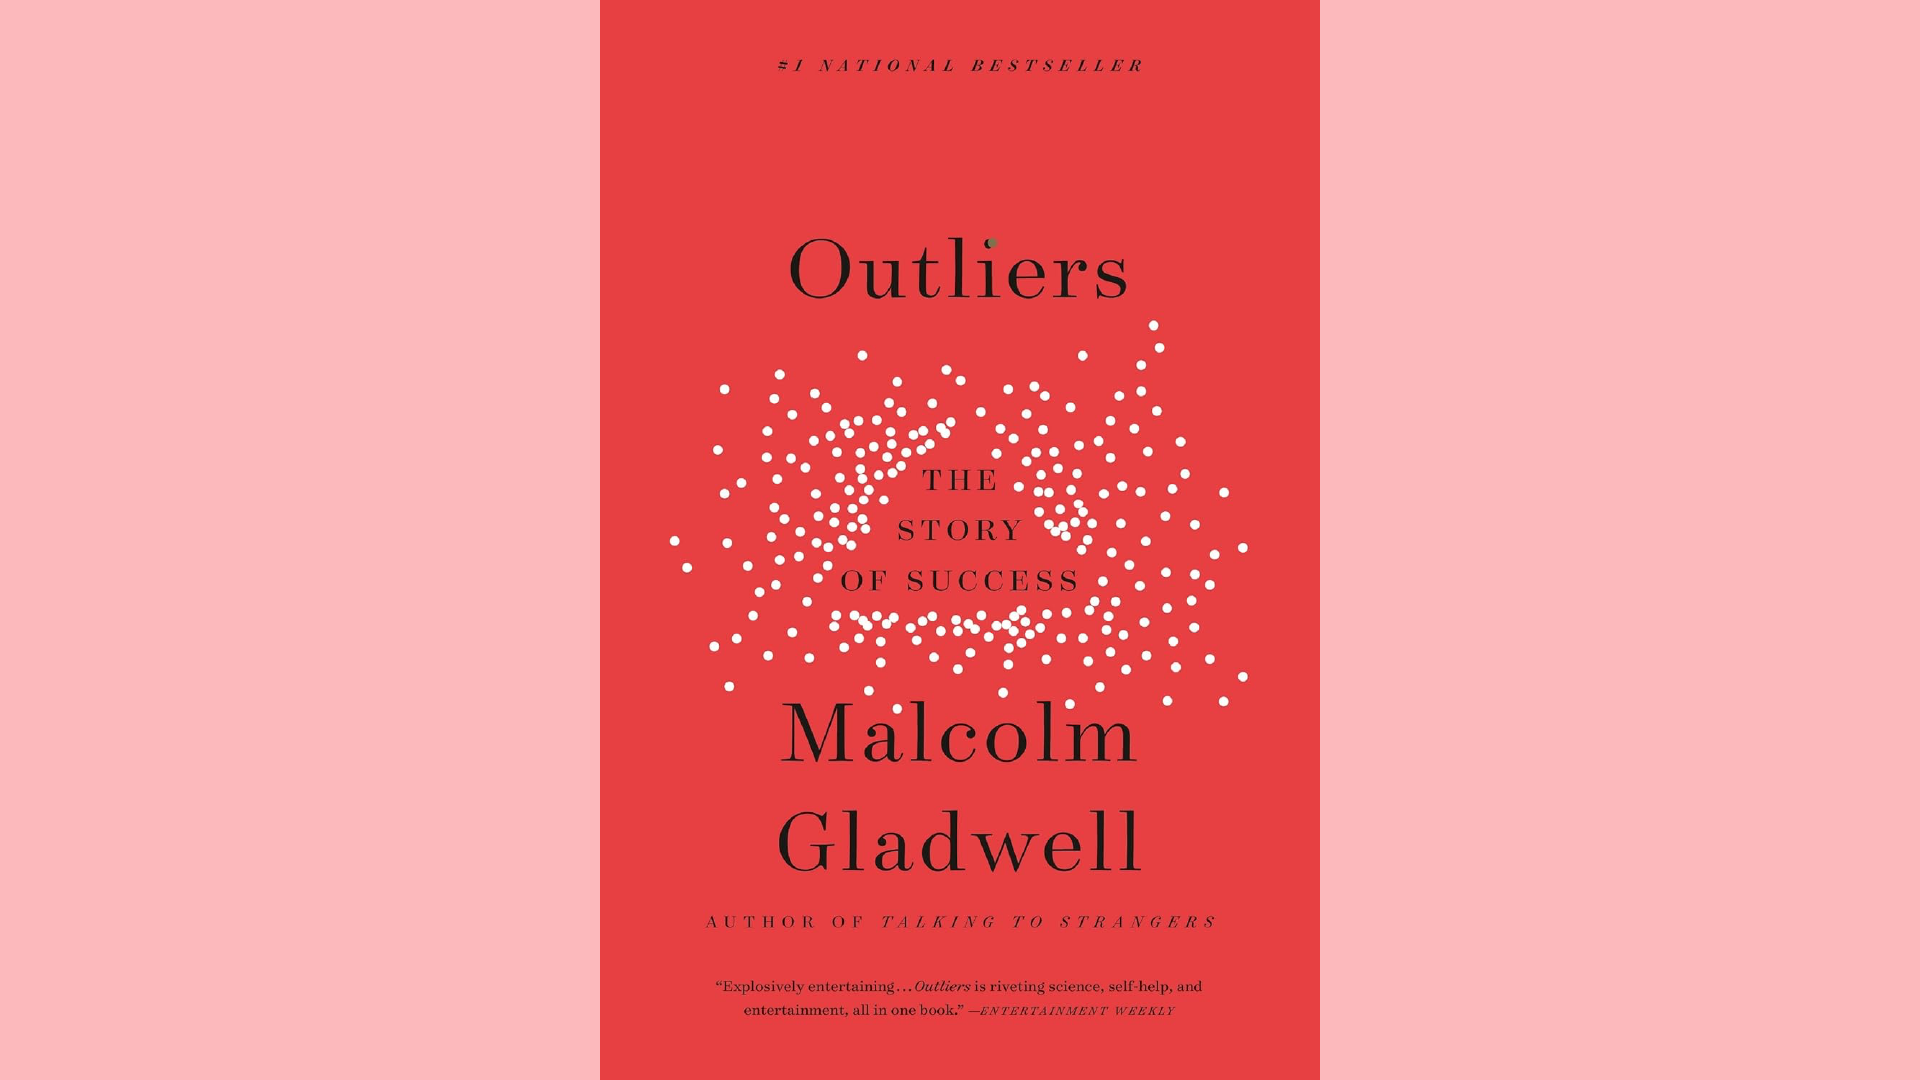 Summary: Outliers by Malcolm Gladwell